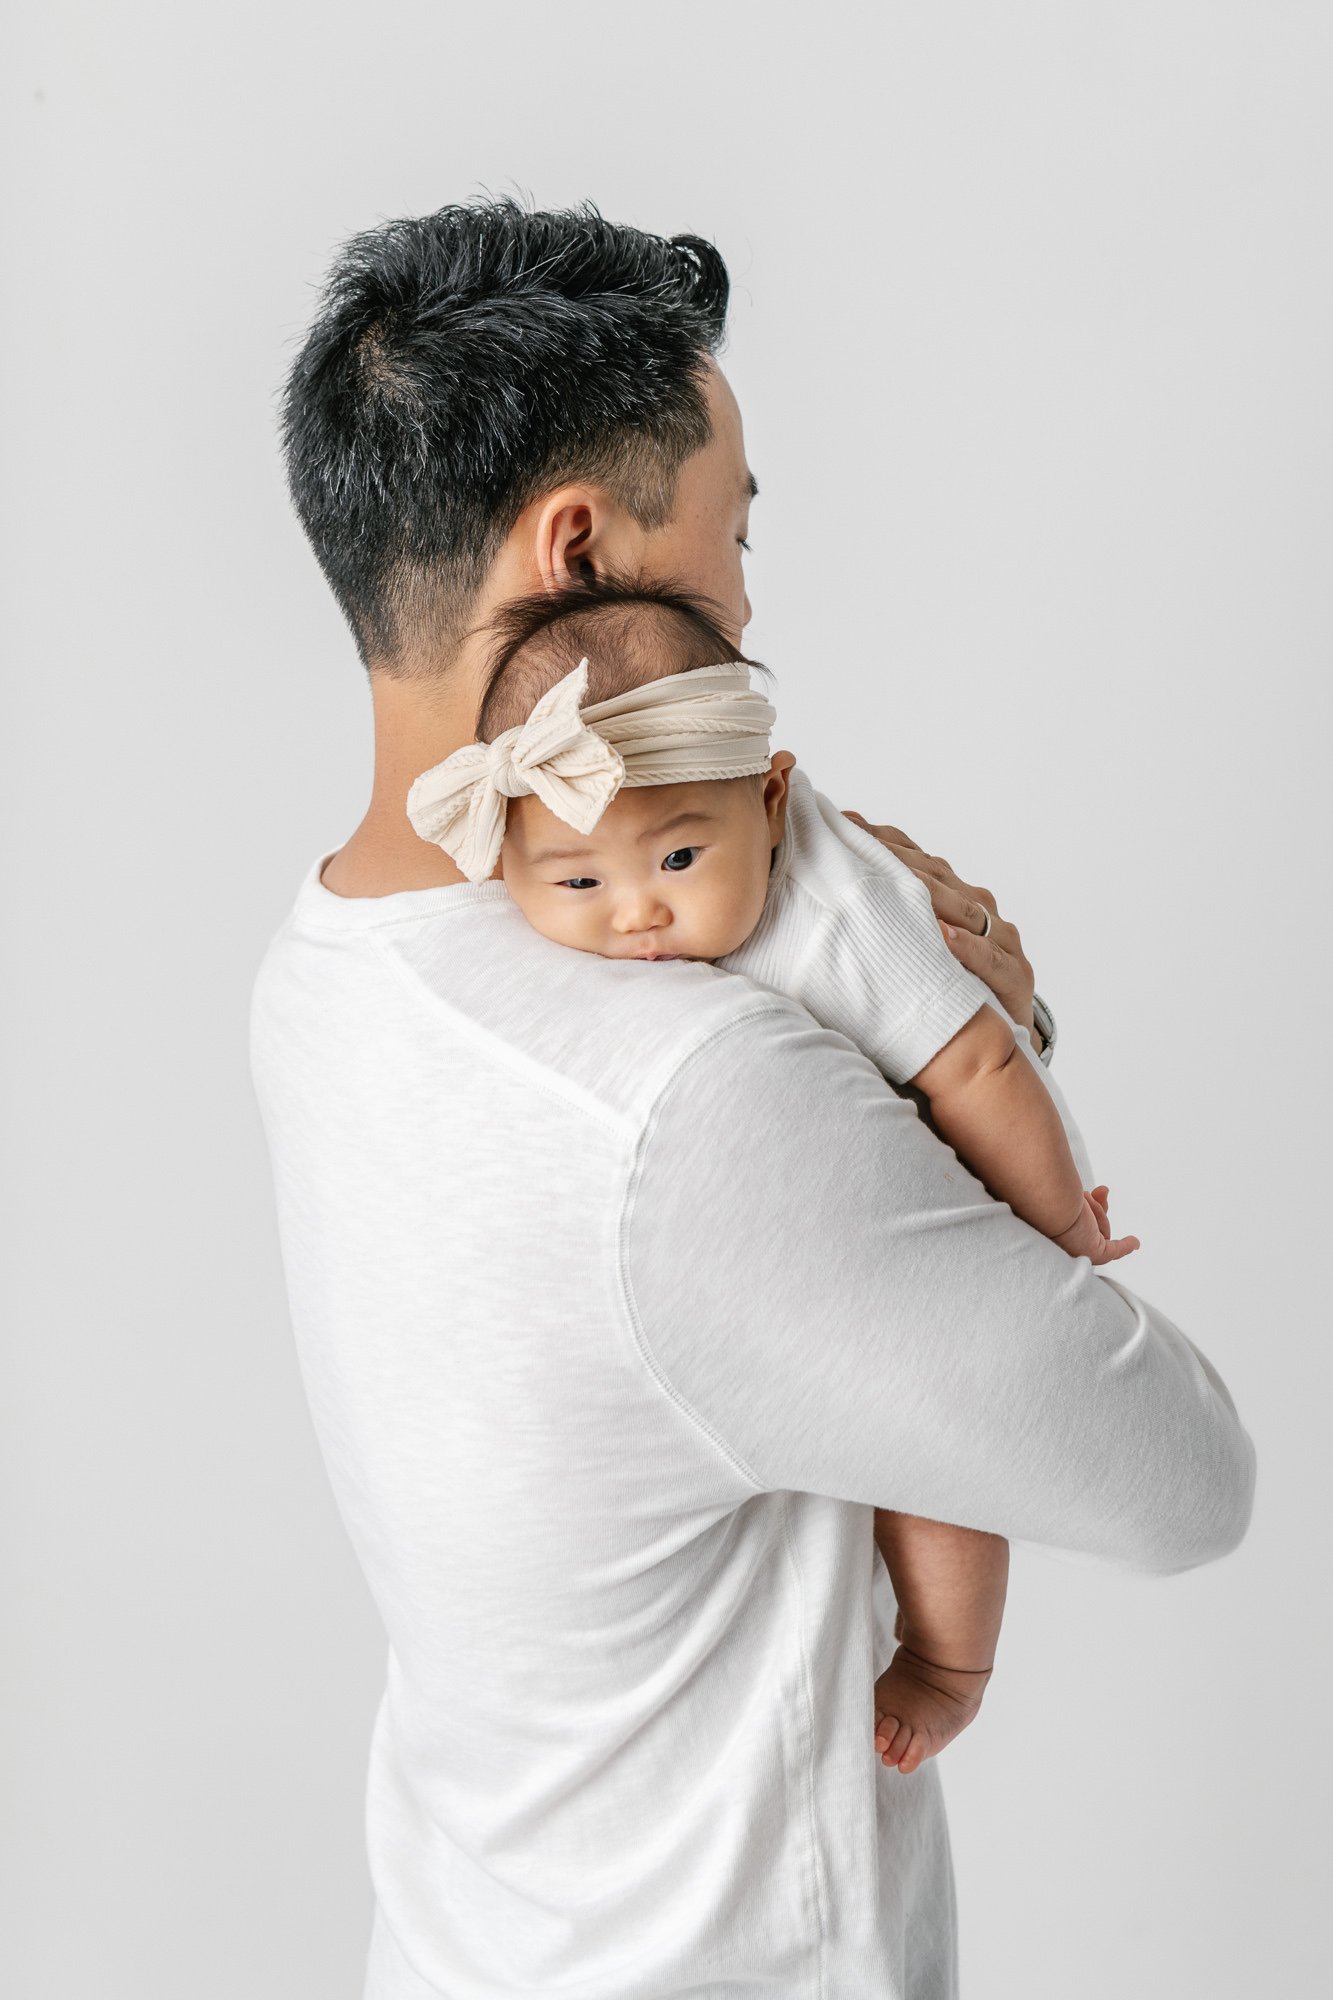    Newborn baby girl placed over father’s shoulder while father is turned away. Sleepy baby captured in tender moment with dad by Nicole Hawkins Photography in studio in New Jersey&nbsp; #studionewborns #studioportraits #babystudioportraits #NewJerse